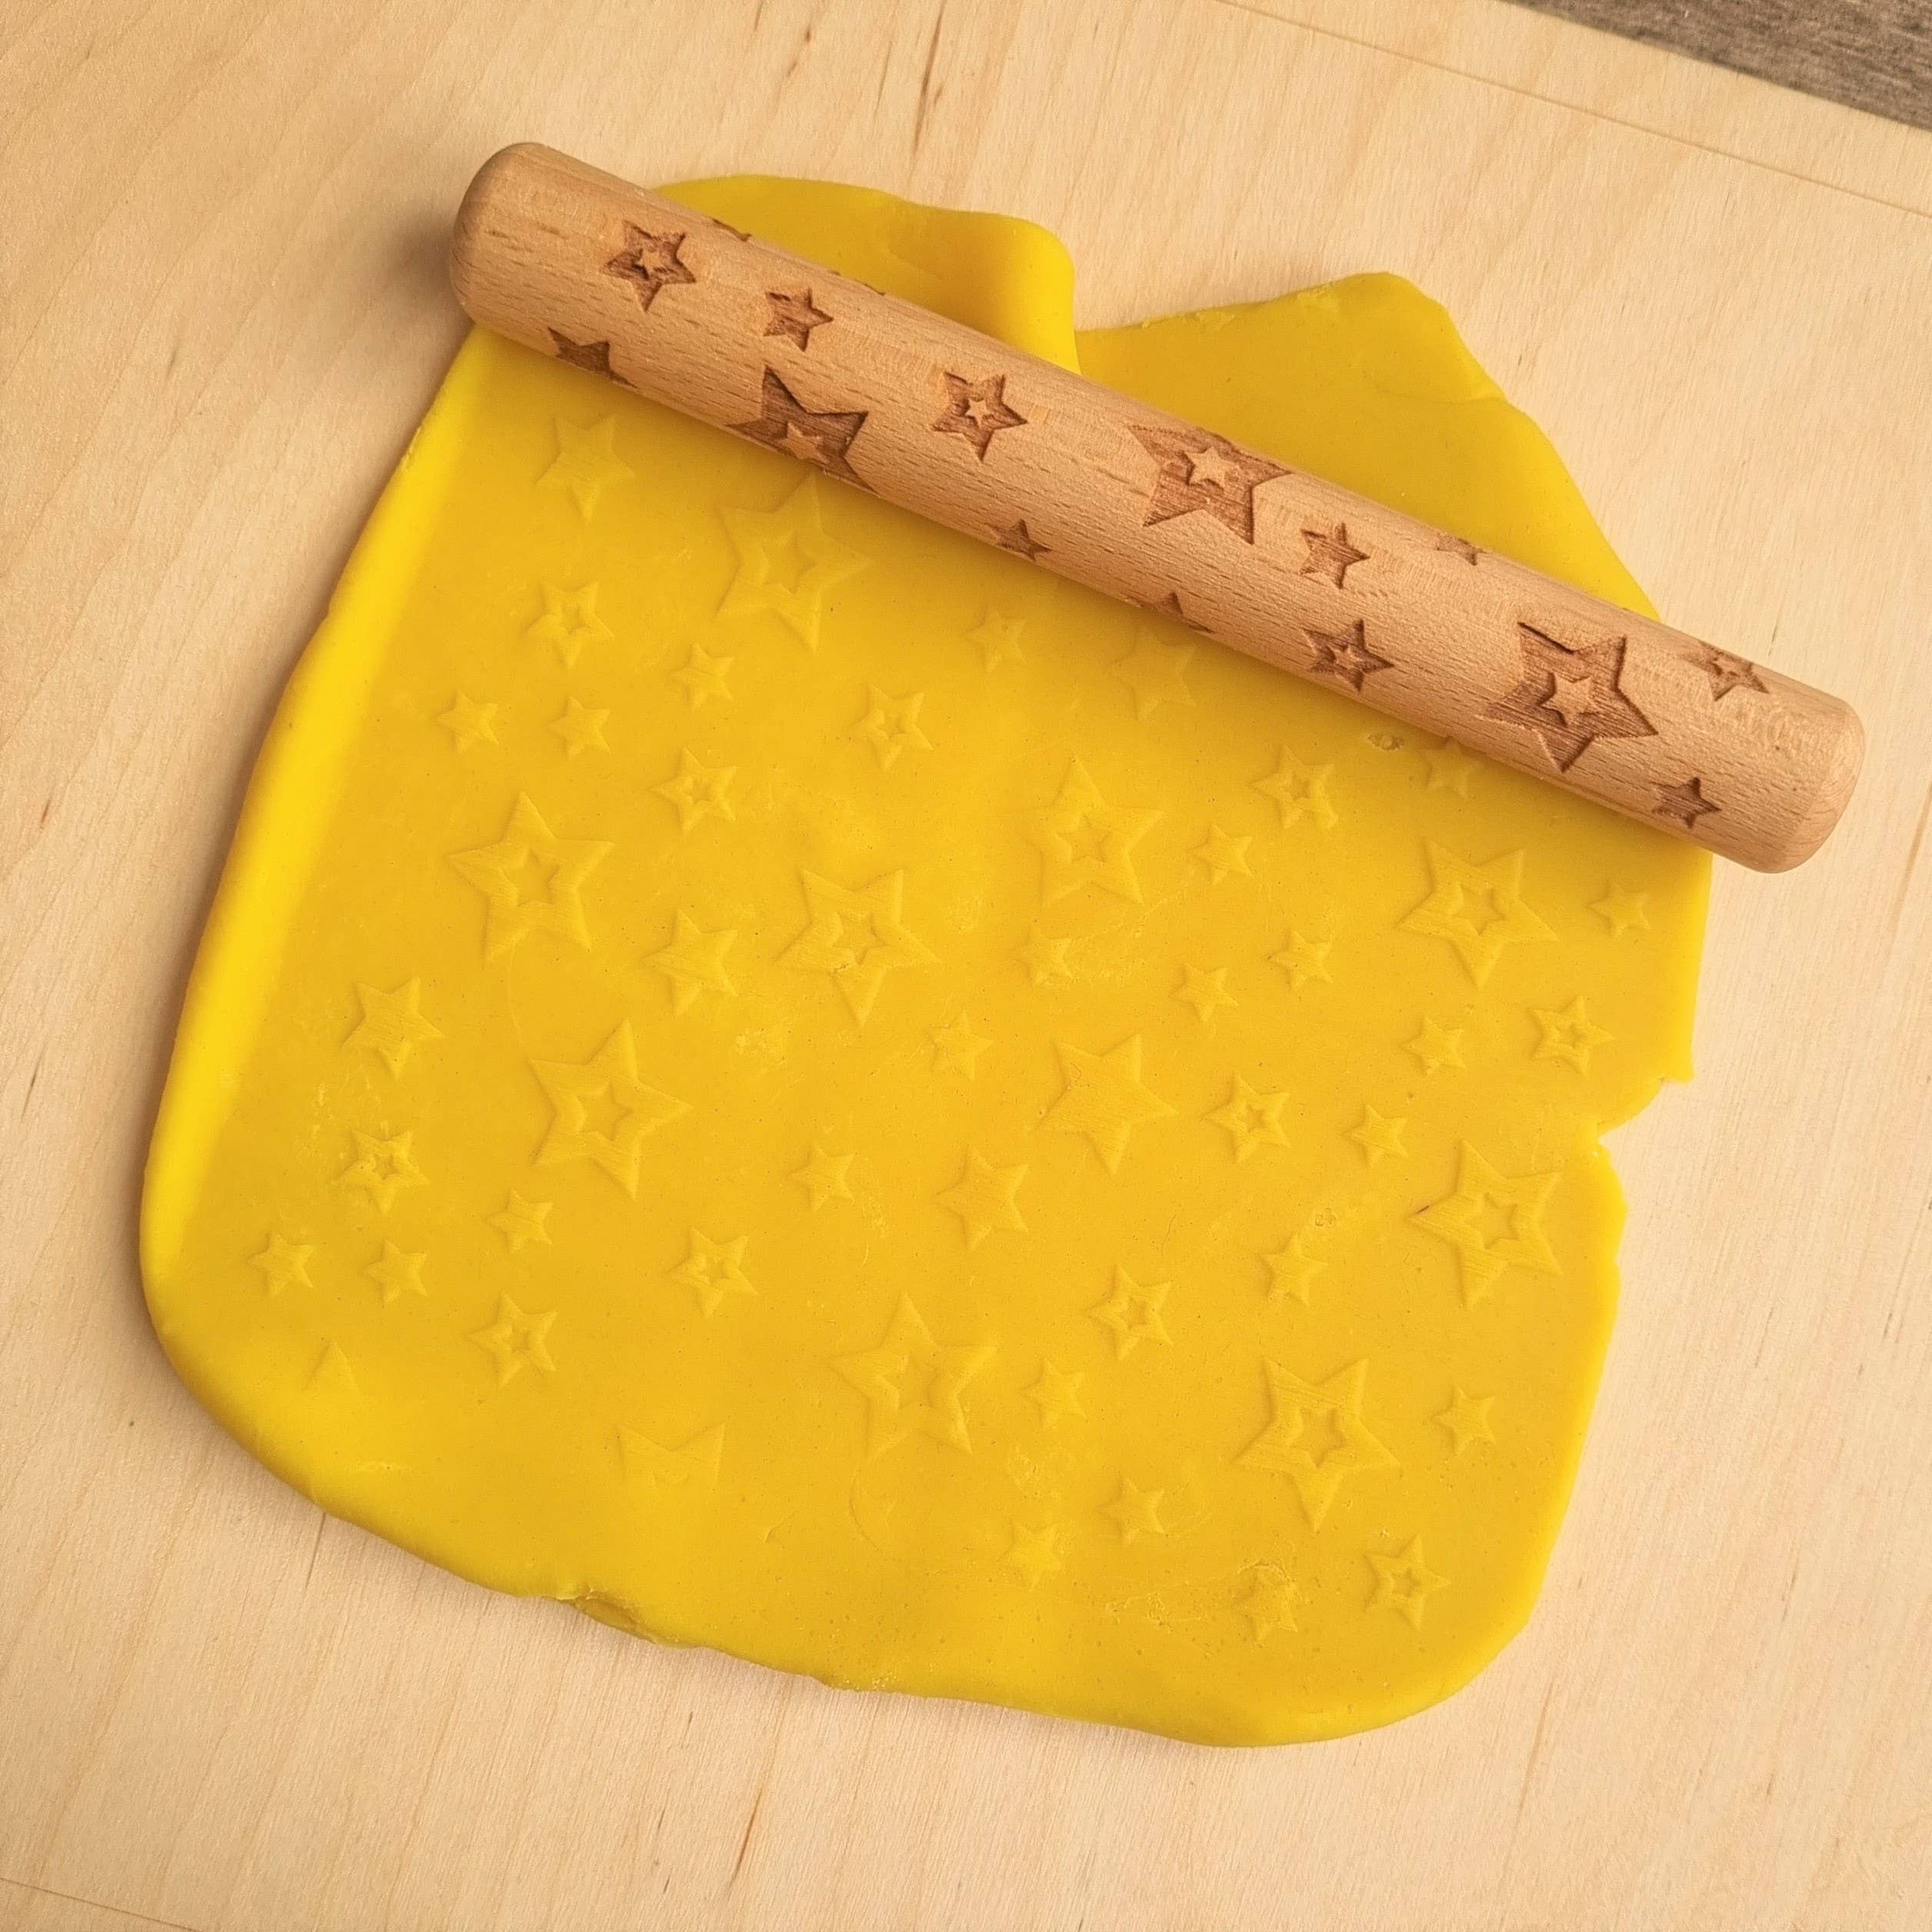 Stars Wooden Roller, Introducing our Stars Wooden Roller.This unique and charming roller is the perfect addition to your child's art and sensory playtime. Made from high-quality wood, this Stars Wooden Roller is designed to create texture and relief as your little ones roll out their clay creations. The Stars Wooden Roller features a fun star pattern, perfect for playful and imaginative minds. The rollers are 16 cm long and 2 cm in diameter The rollers are made of beech wood. If clay/dough remains in the ro